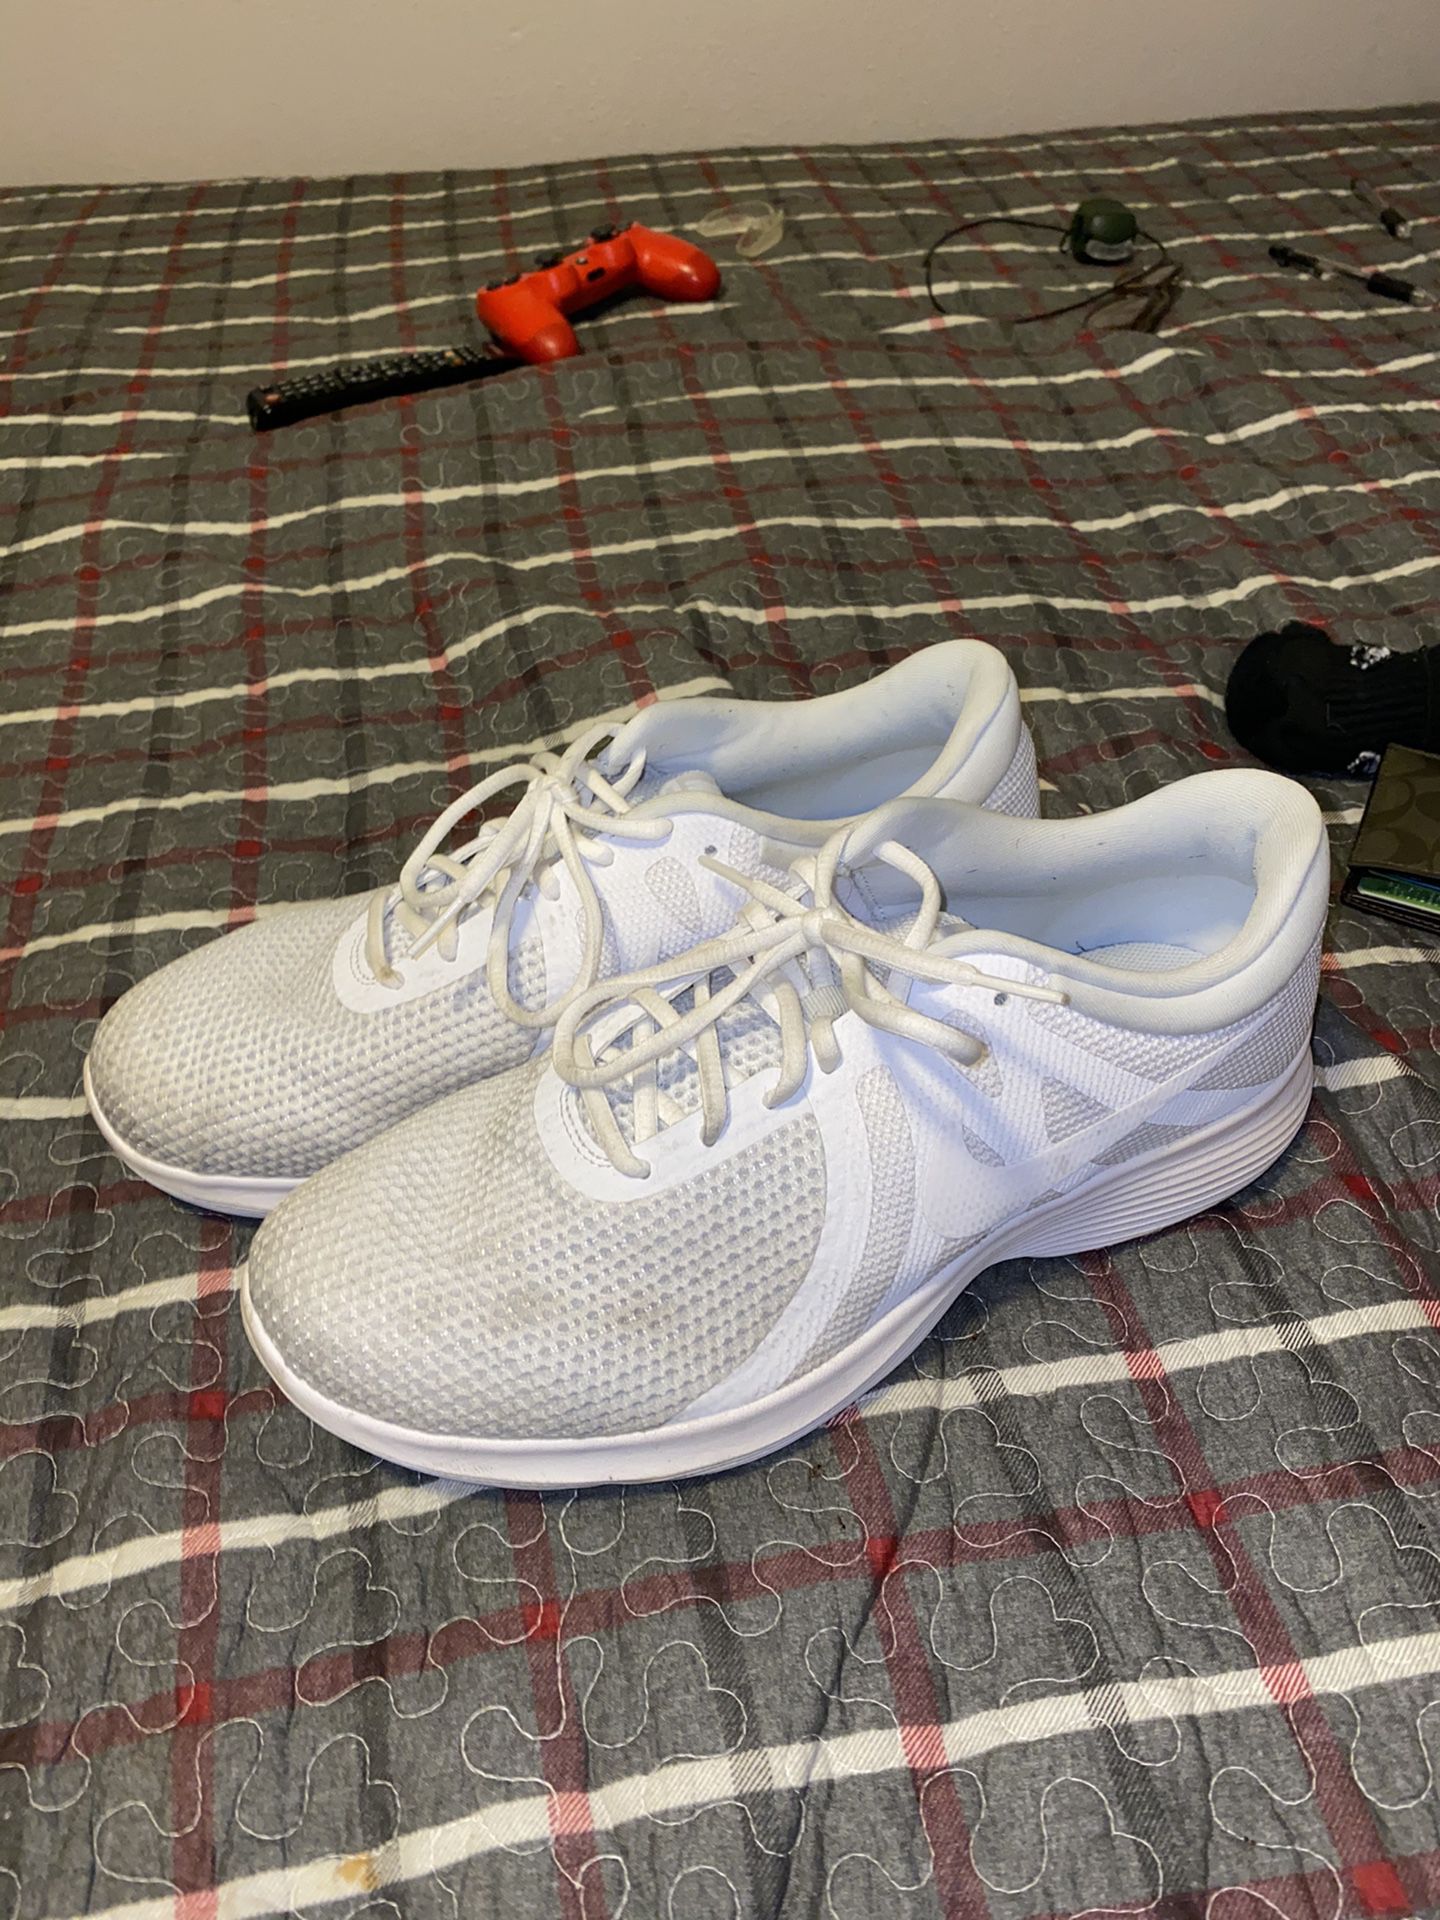 Nike shoes for women size 12W